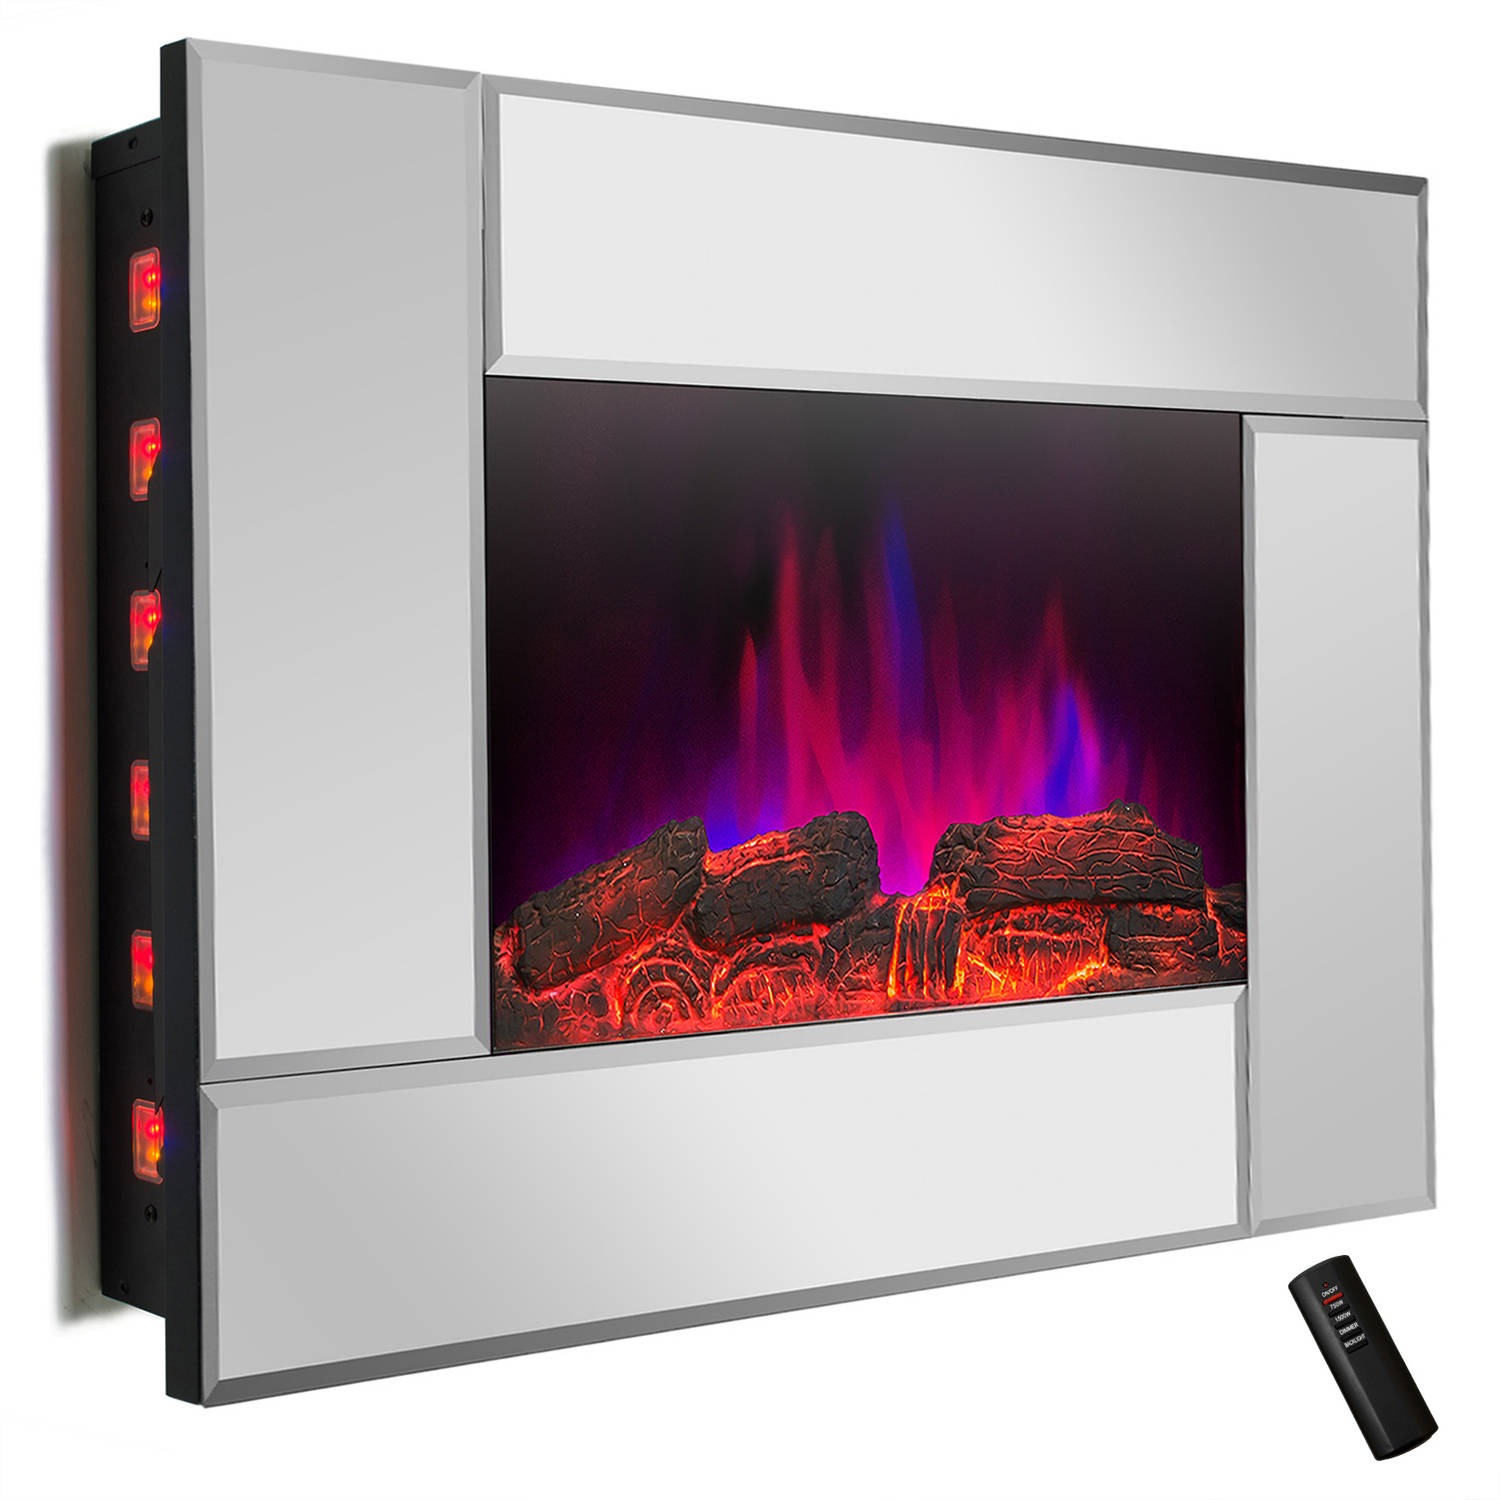 AKDY FP0050 36" 1500W Wall Mount Electric Fireplace Heater with Tempered Glass, Pebbles, Logs and Remote Control, Mirror - image 2 of 14